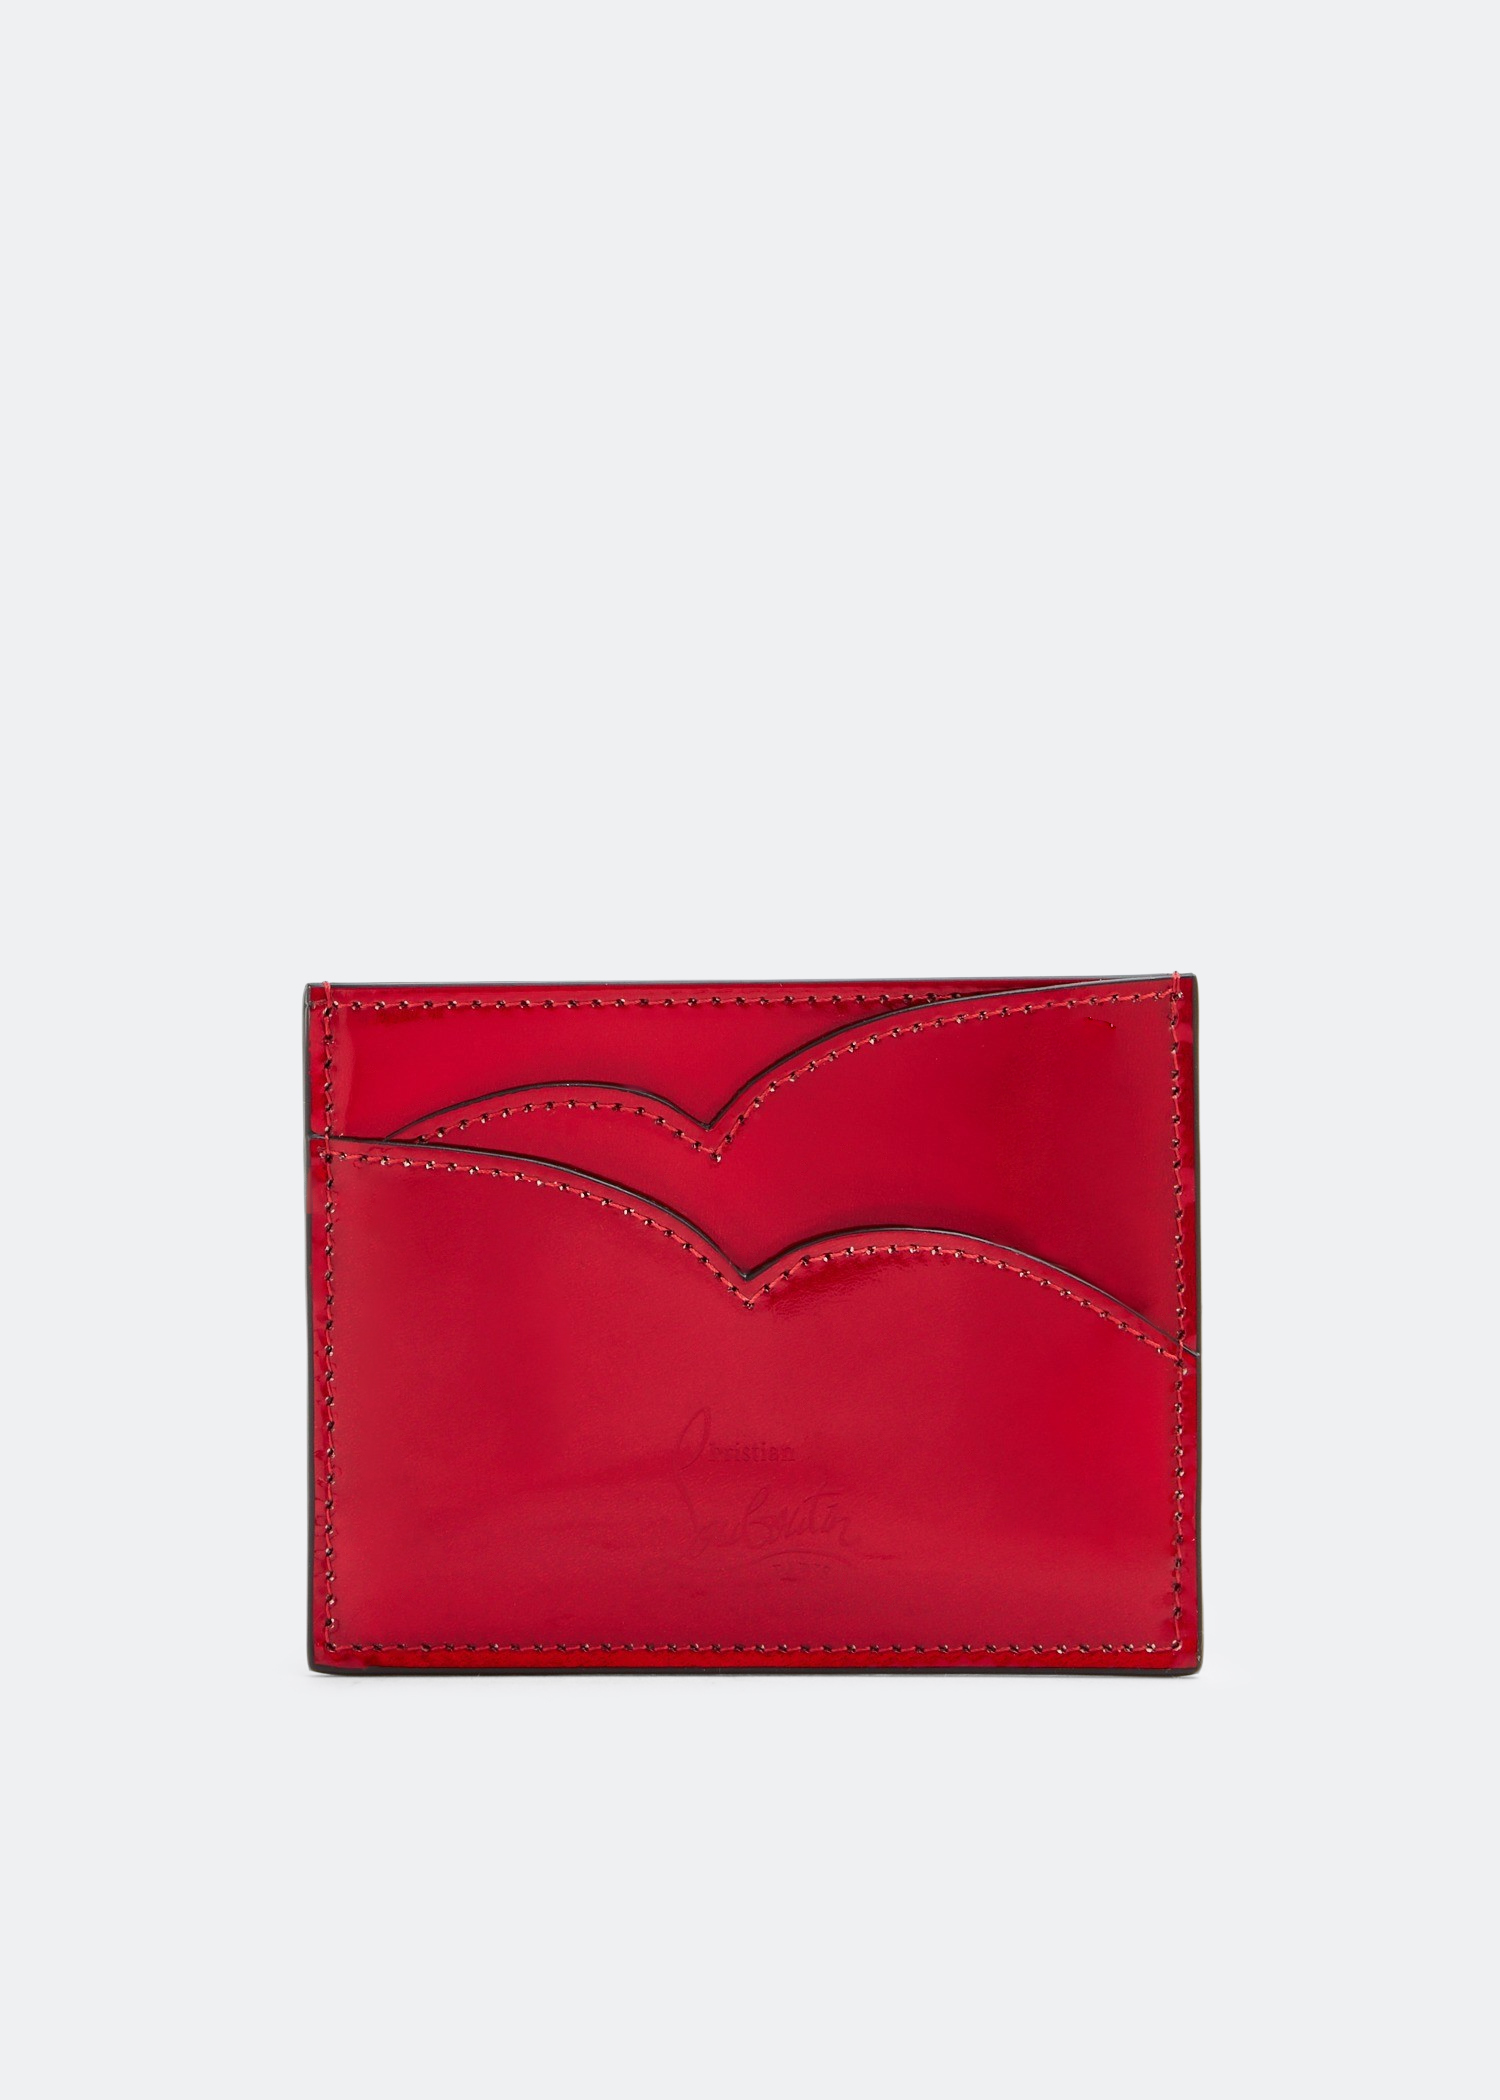 Christian Louboutin Hot Chick Patent Leather Card Holder